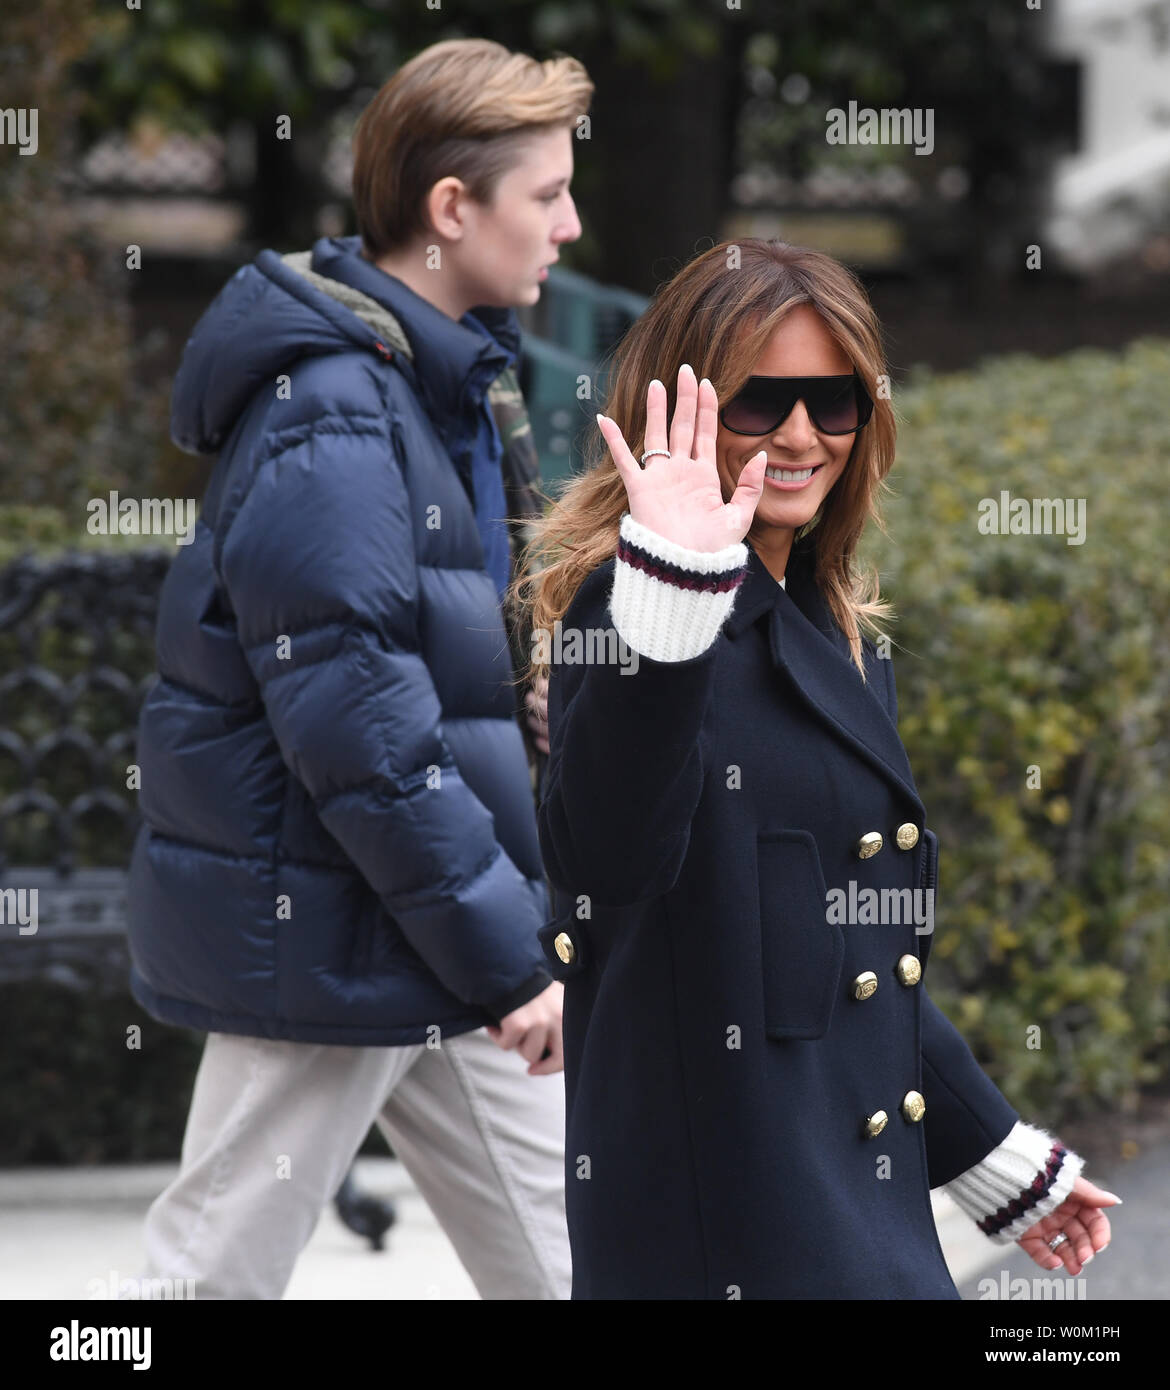 First lady Melania Trump and son Barron depart with President Donald Trump (not shown) via Marine One on the South Lawn of the White House in Washington, DC on March 8, 2019.   The president will stop in Alabama on his way to Mar-a-Lago, Florida for the weekend.     Photo by Pat Benic/UPI Stock Photo